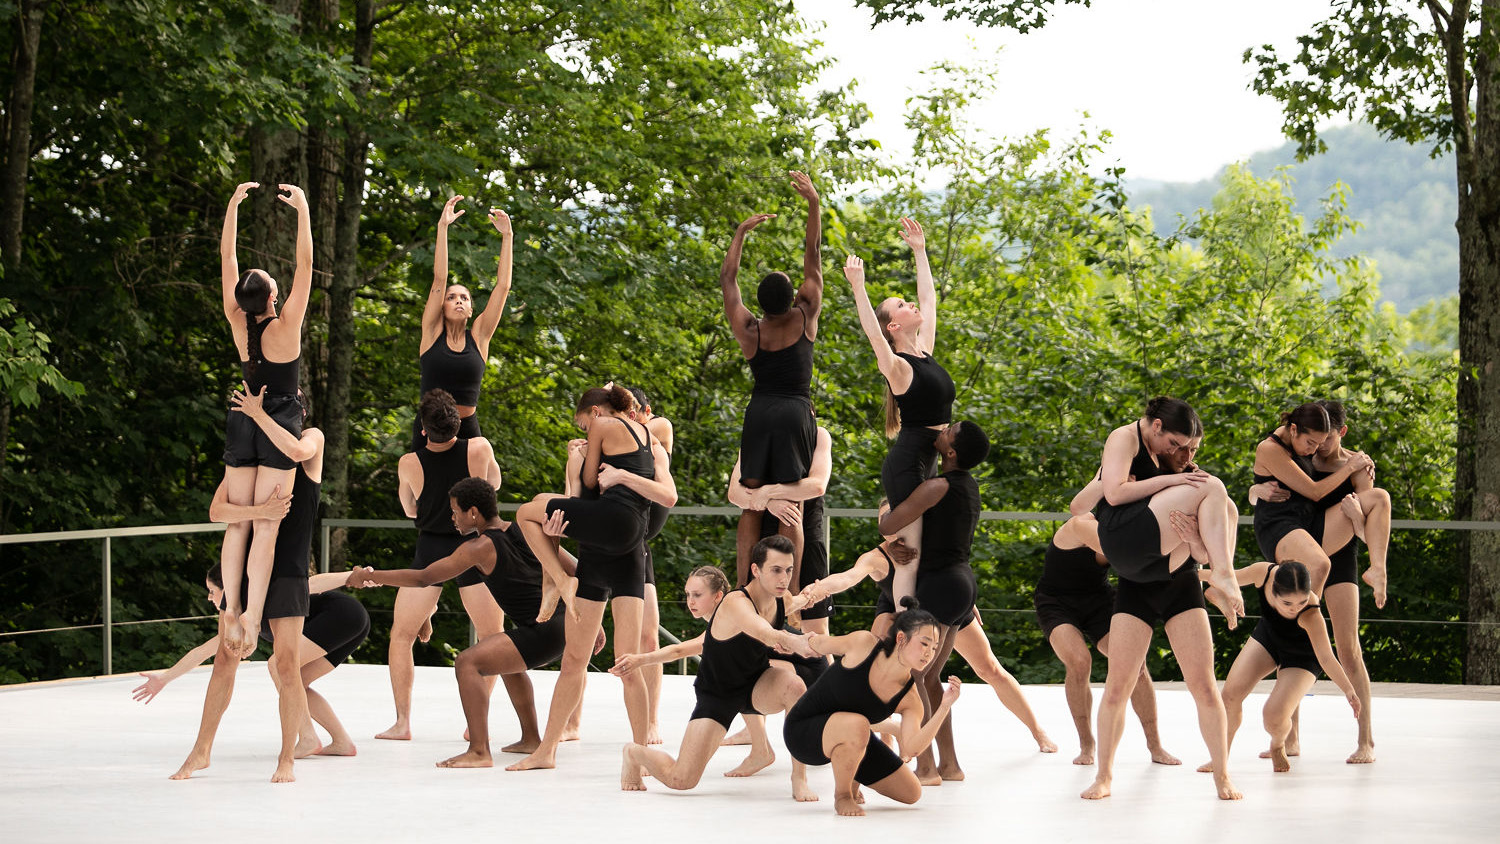 A group of dancers wearing black assume various poses from high to low levels on an outdoor stage.